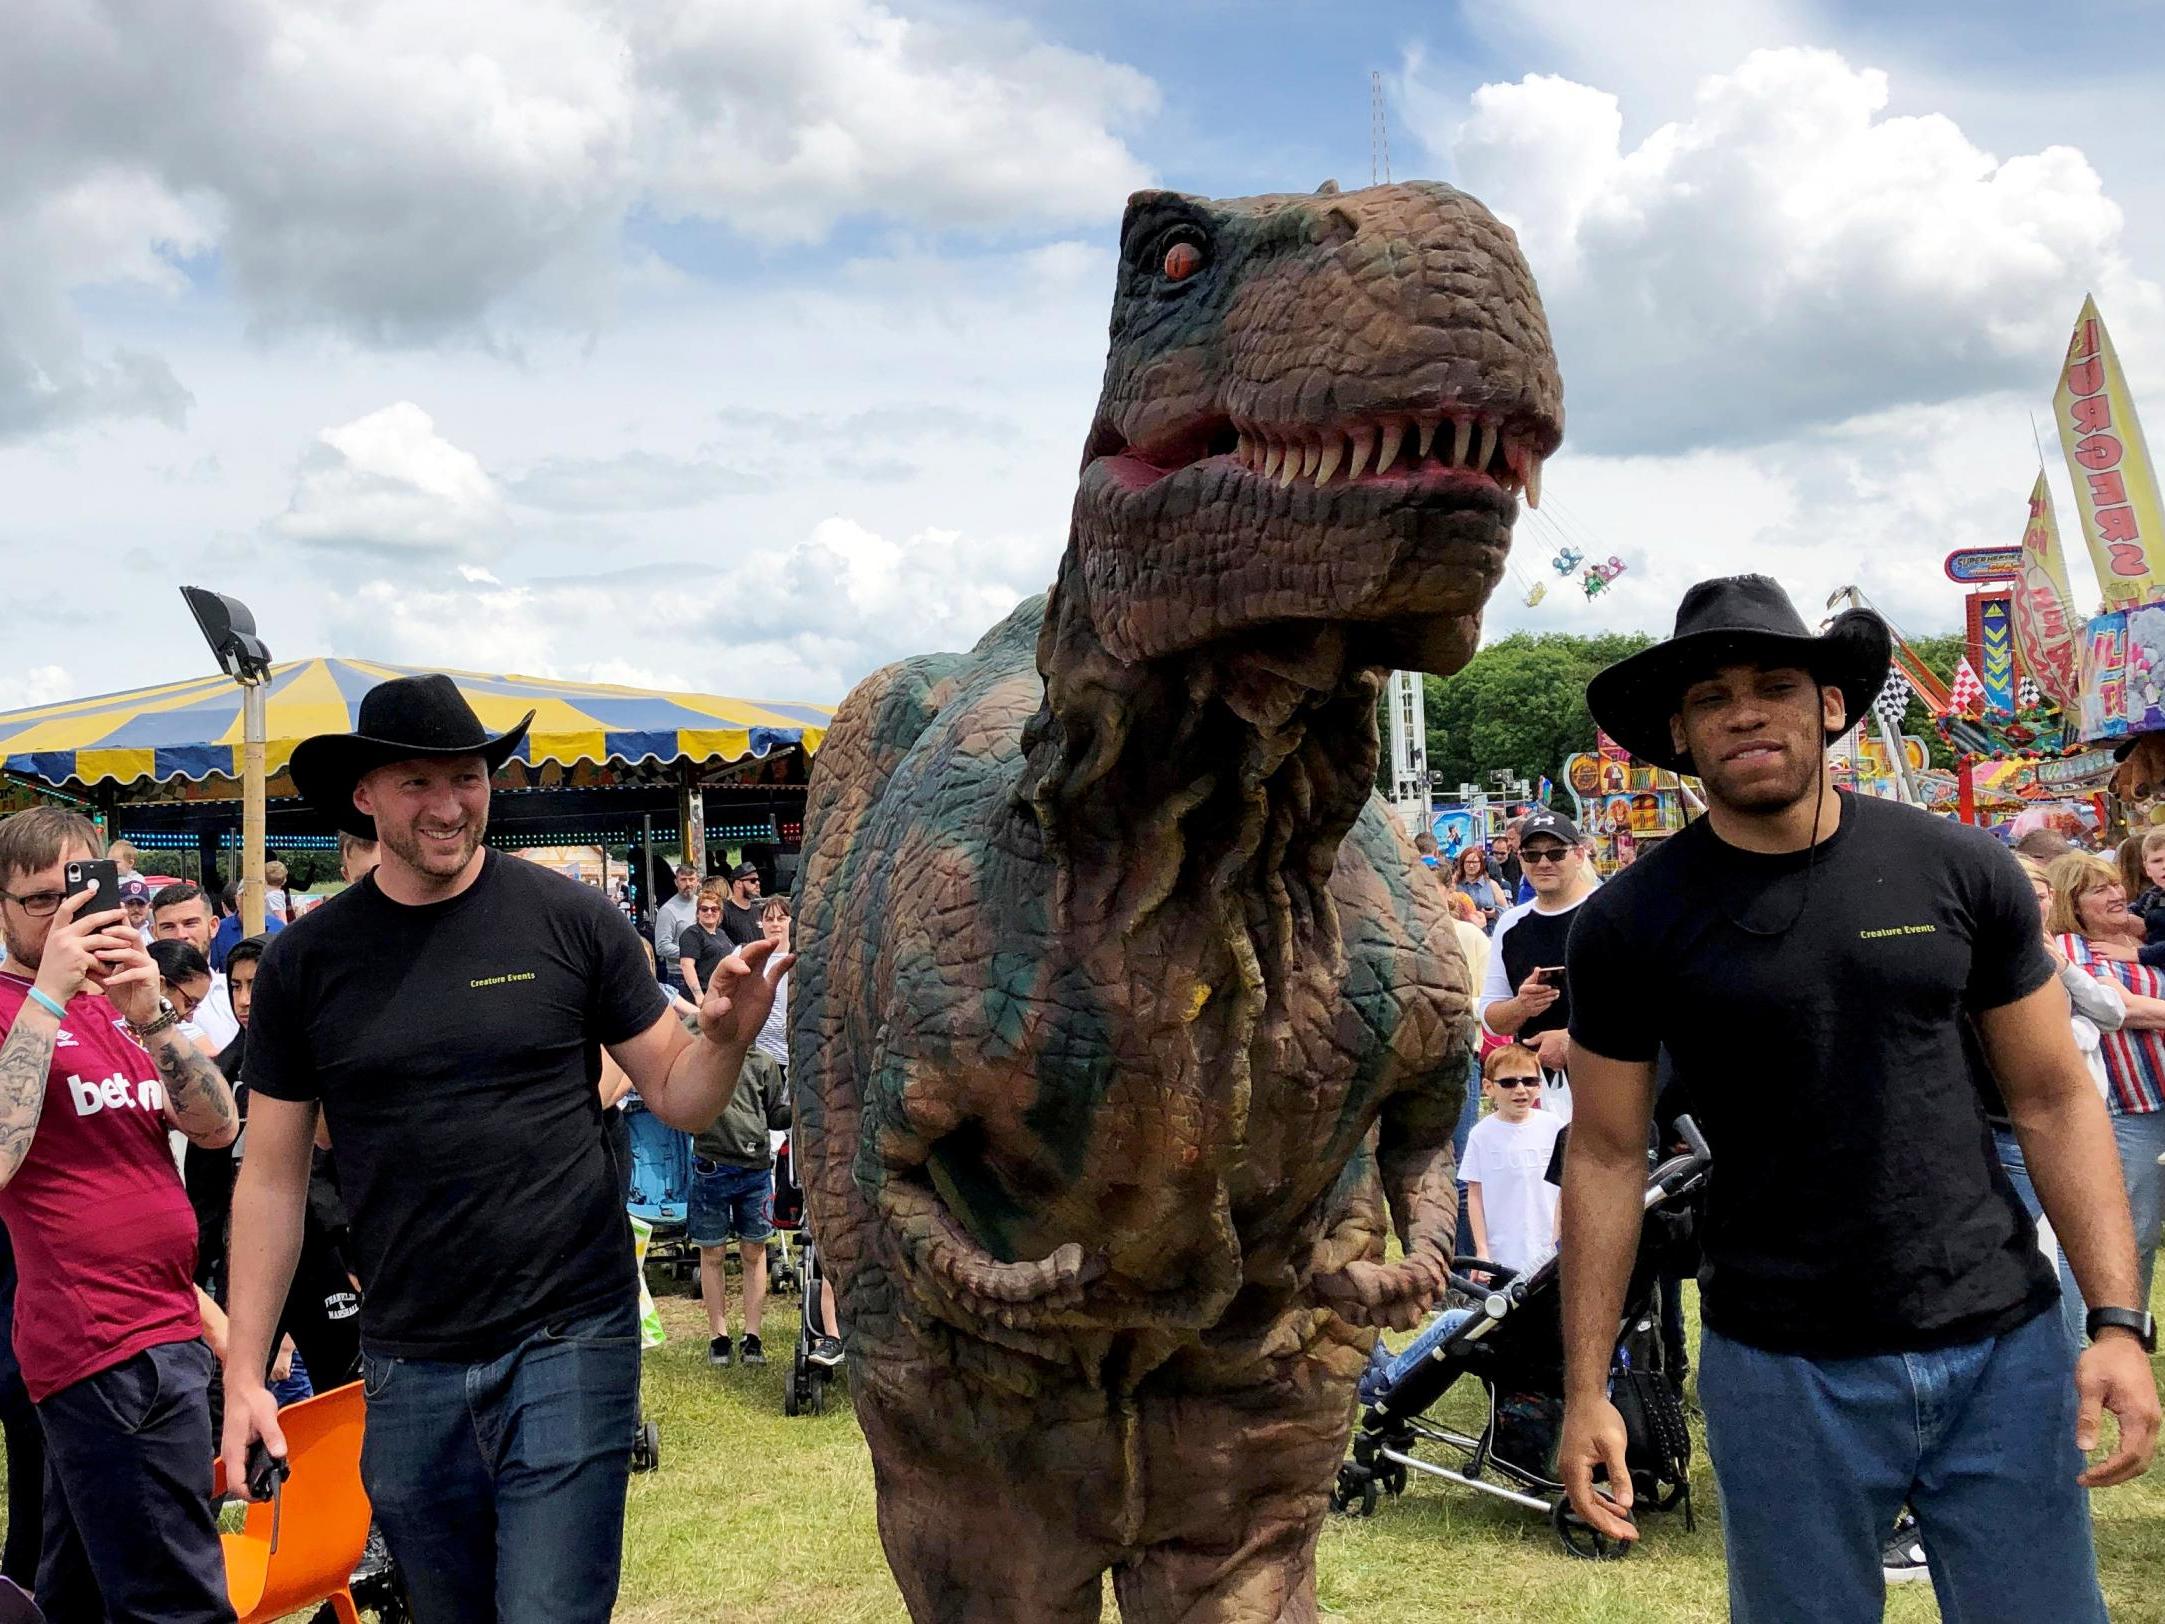 Disappointed families criticised a Jurassic Park attraction in Peterborough on 9 June 2019 as "just a man in a blow up dinosaur suit".